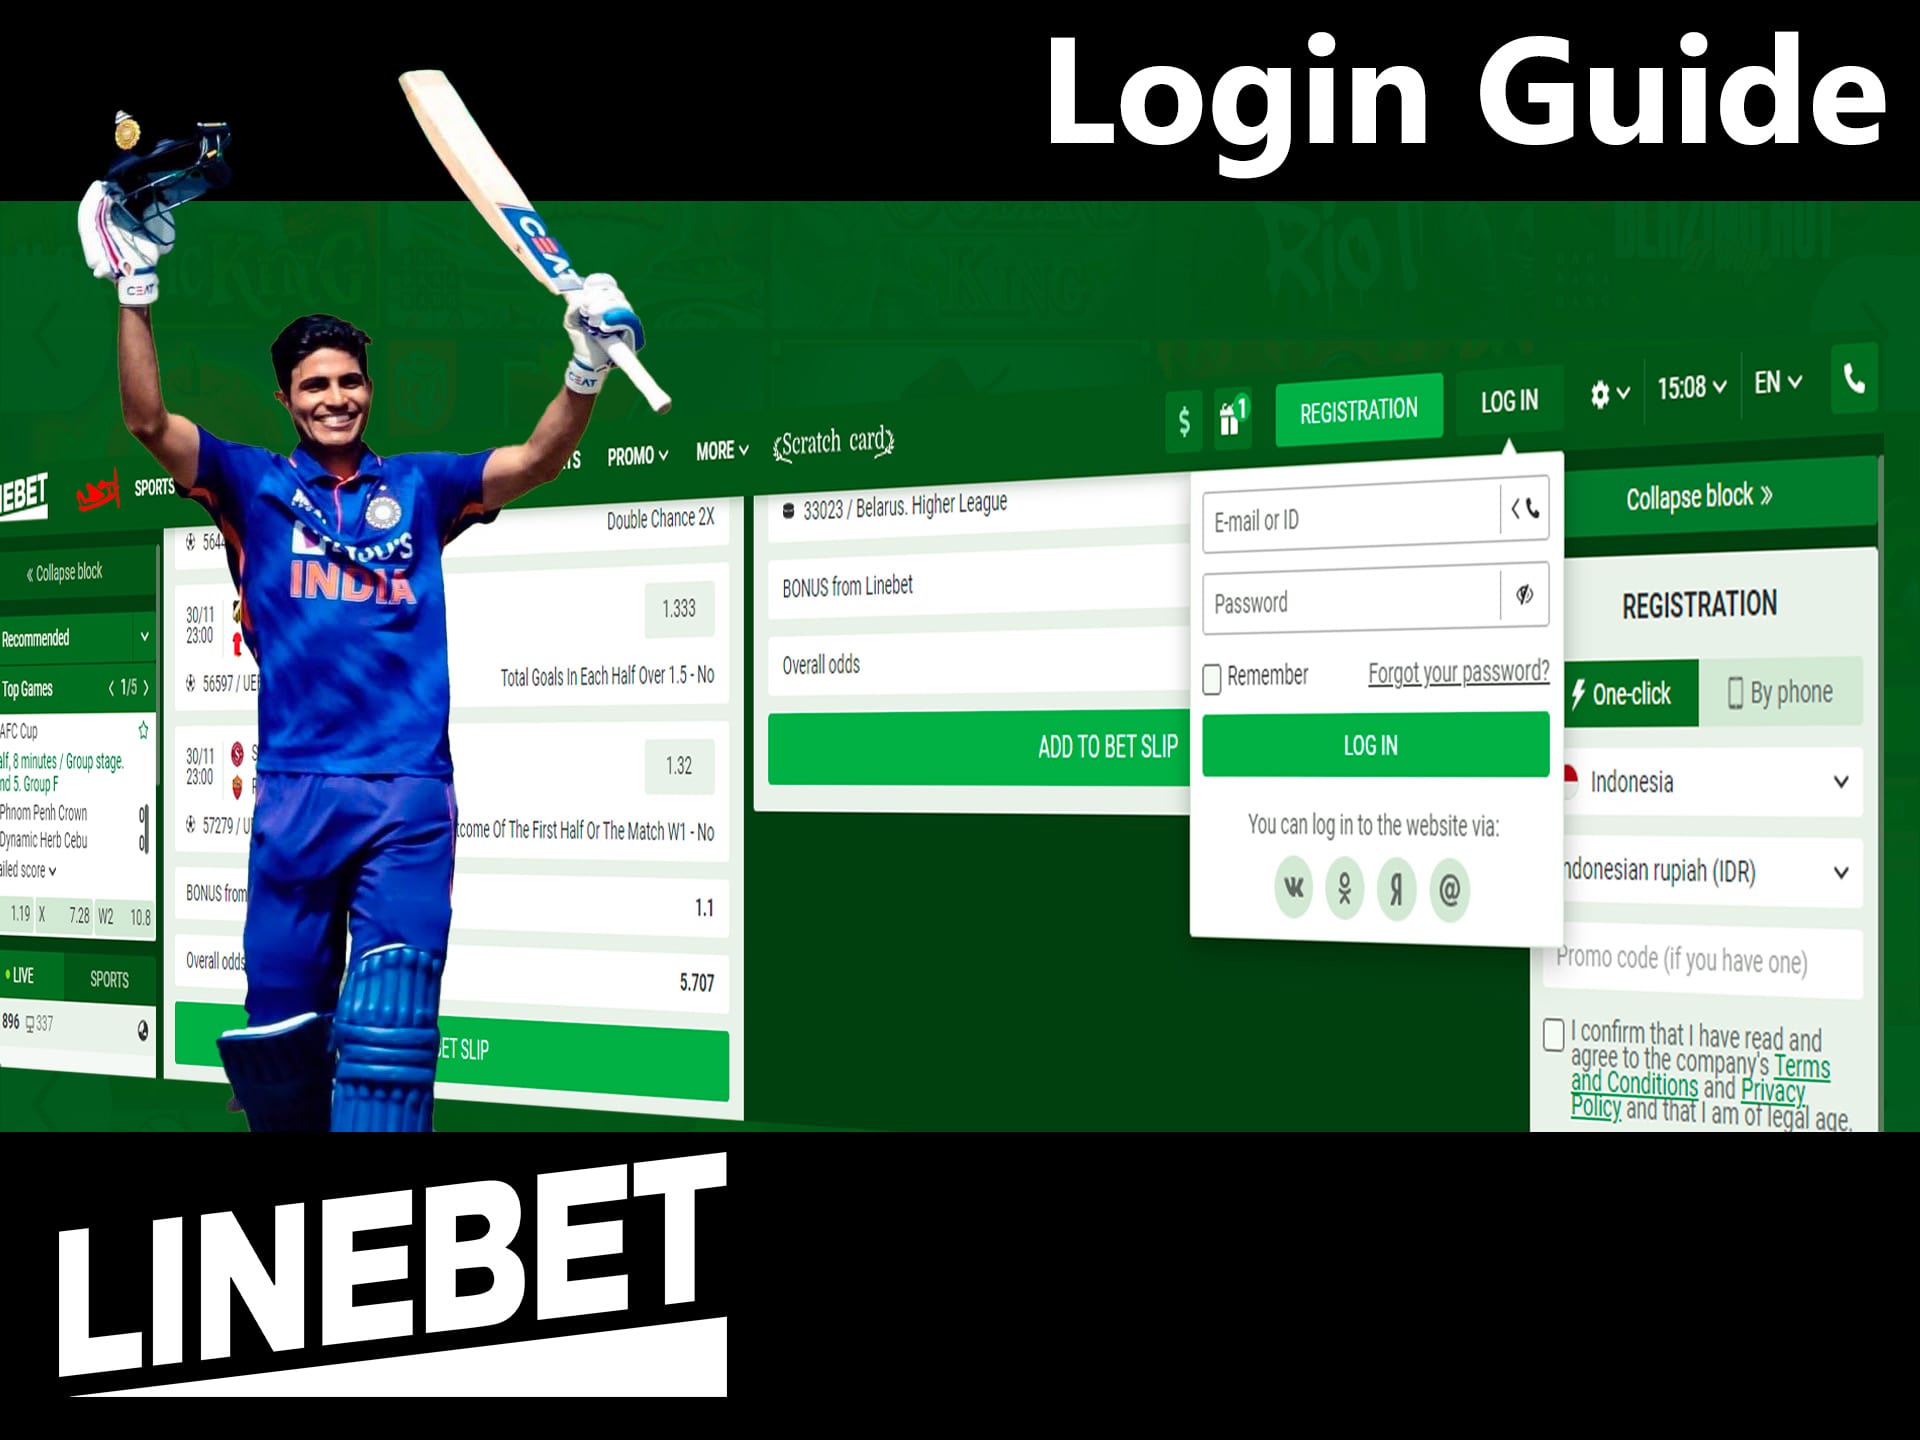 Linebet login guide - how to?